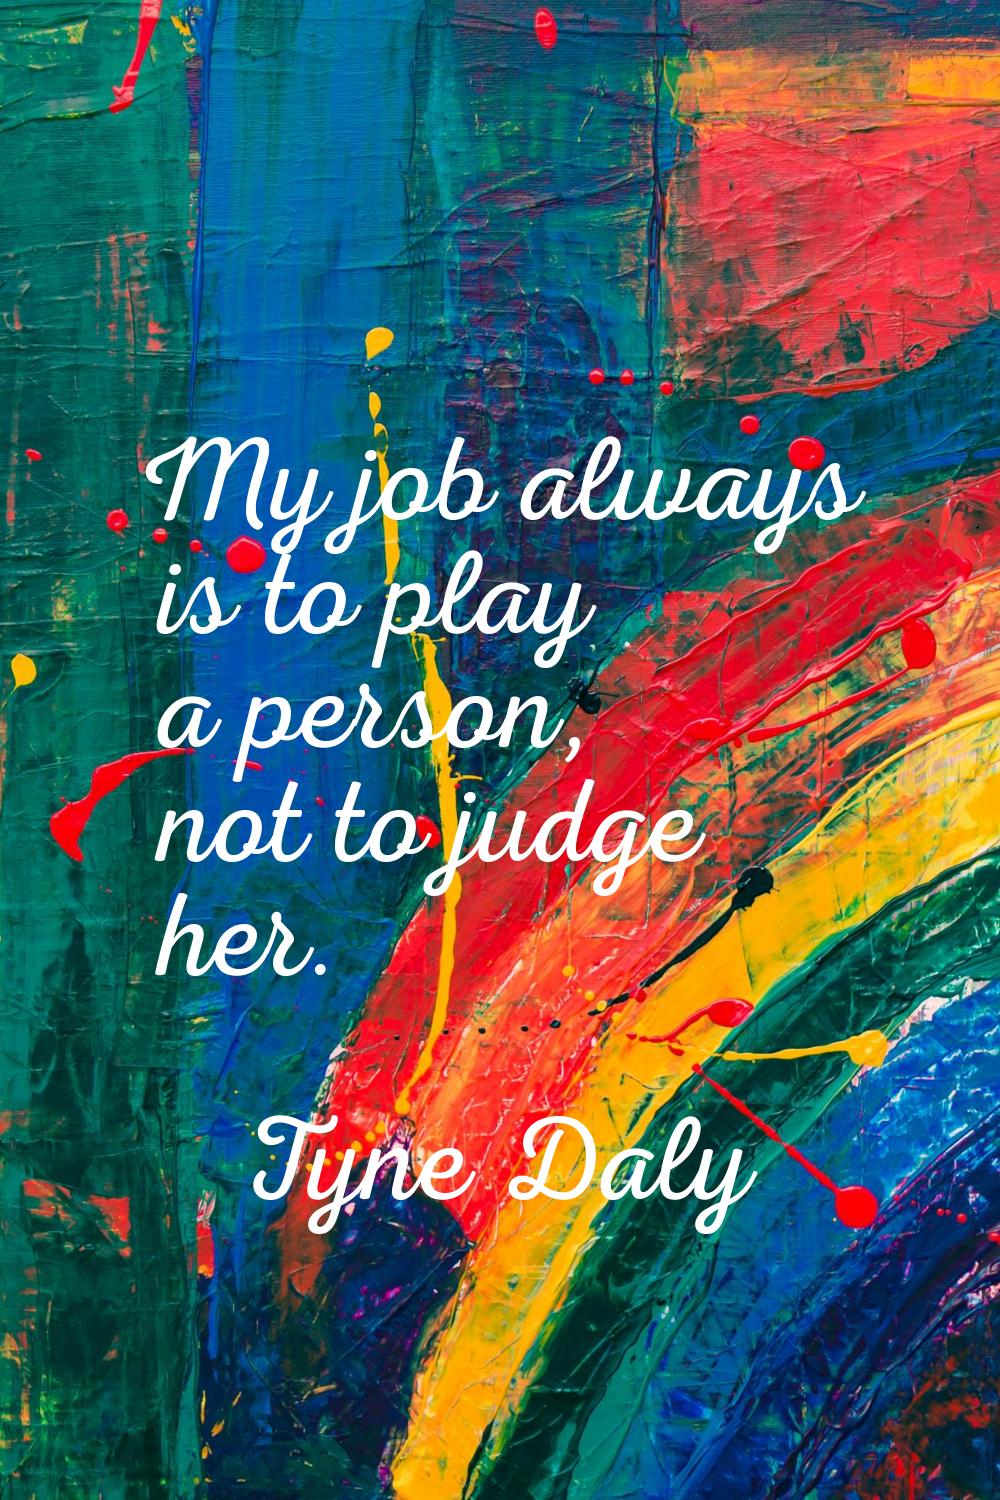 My job always is to play a person, not to judge her.